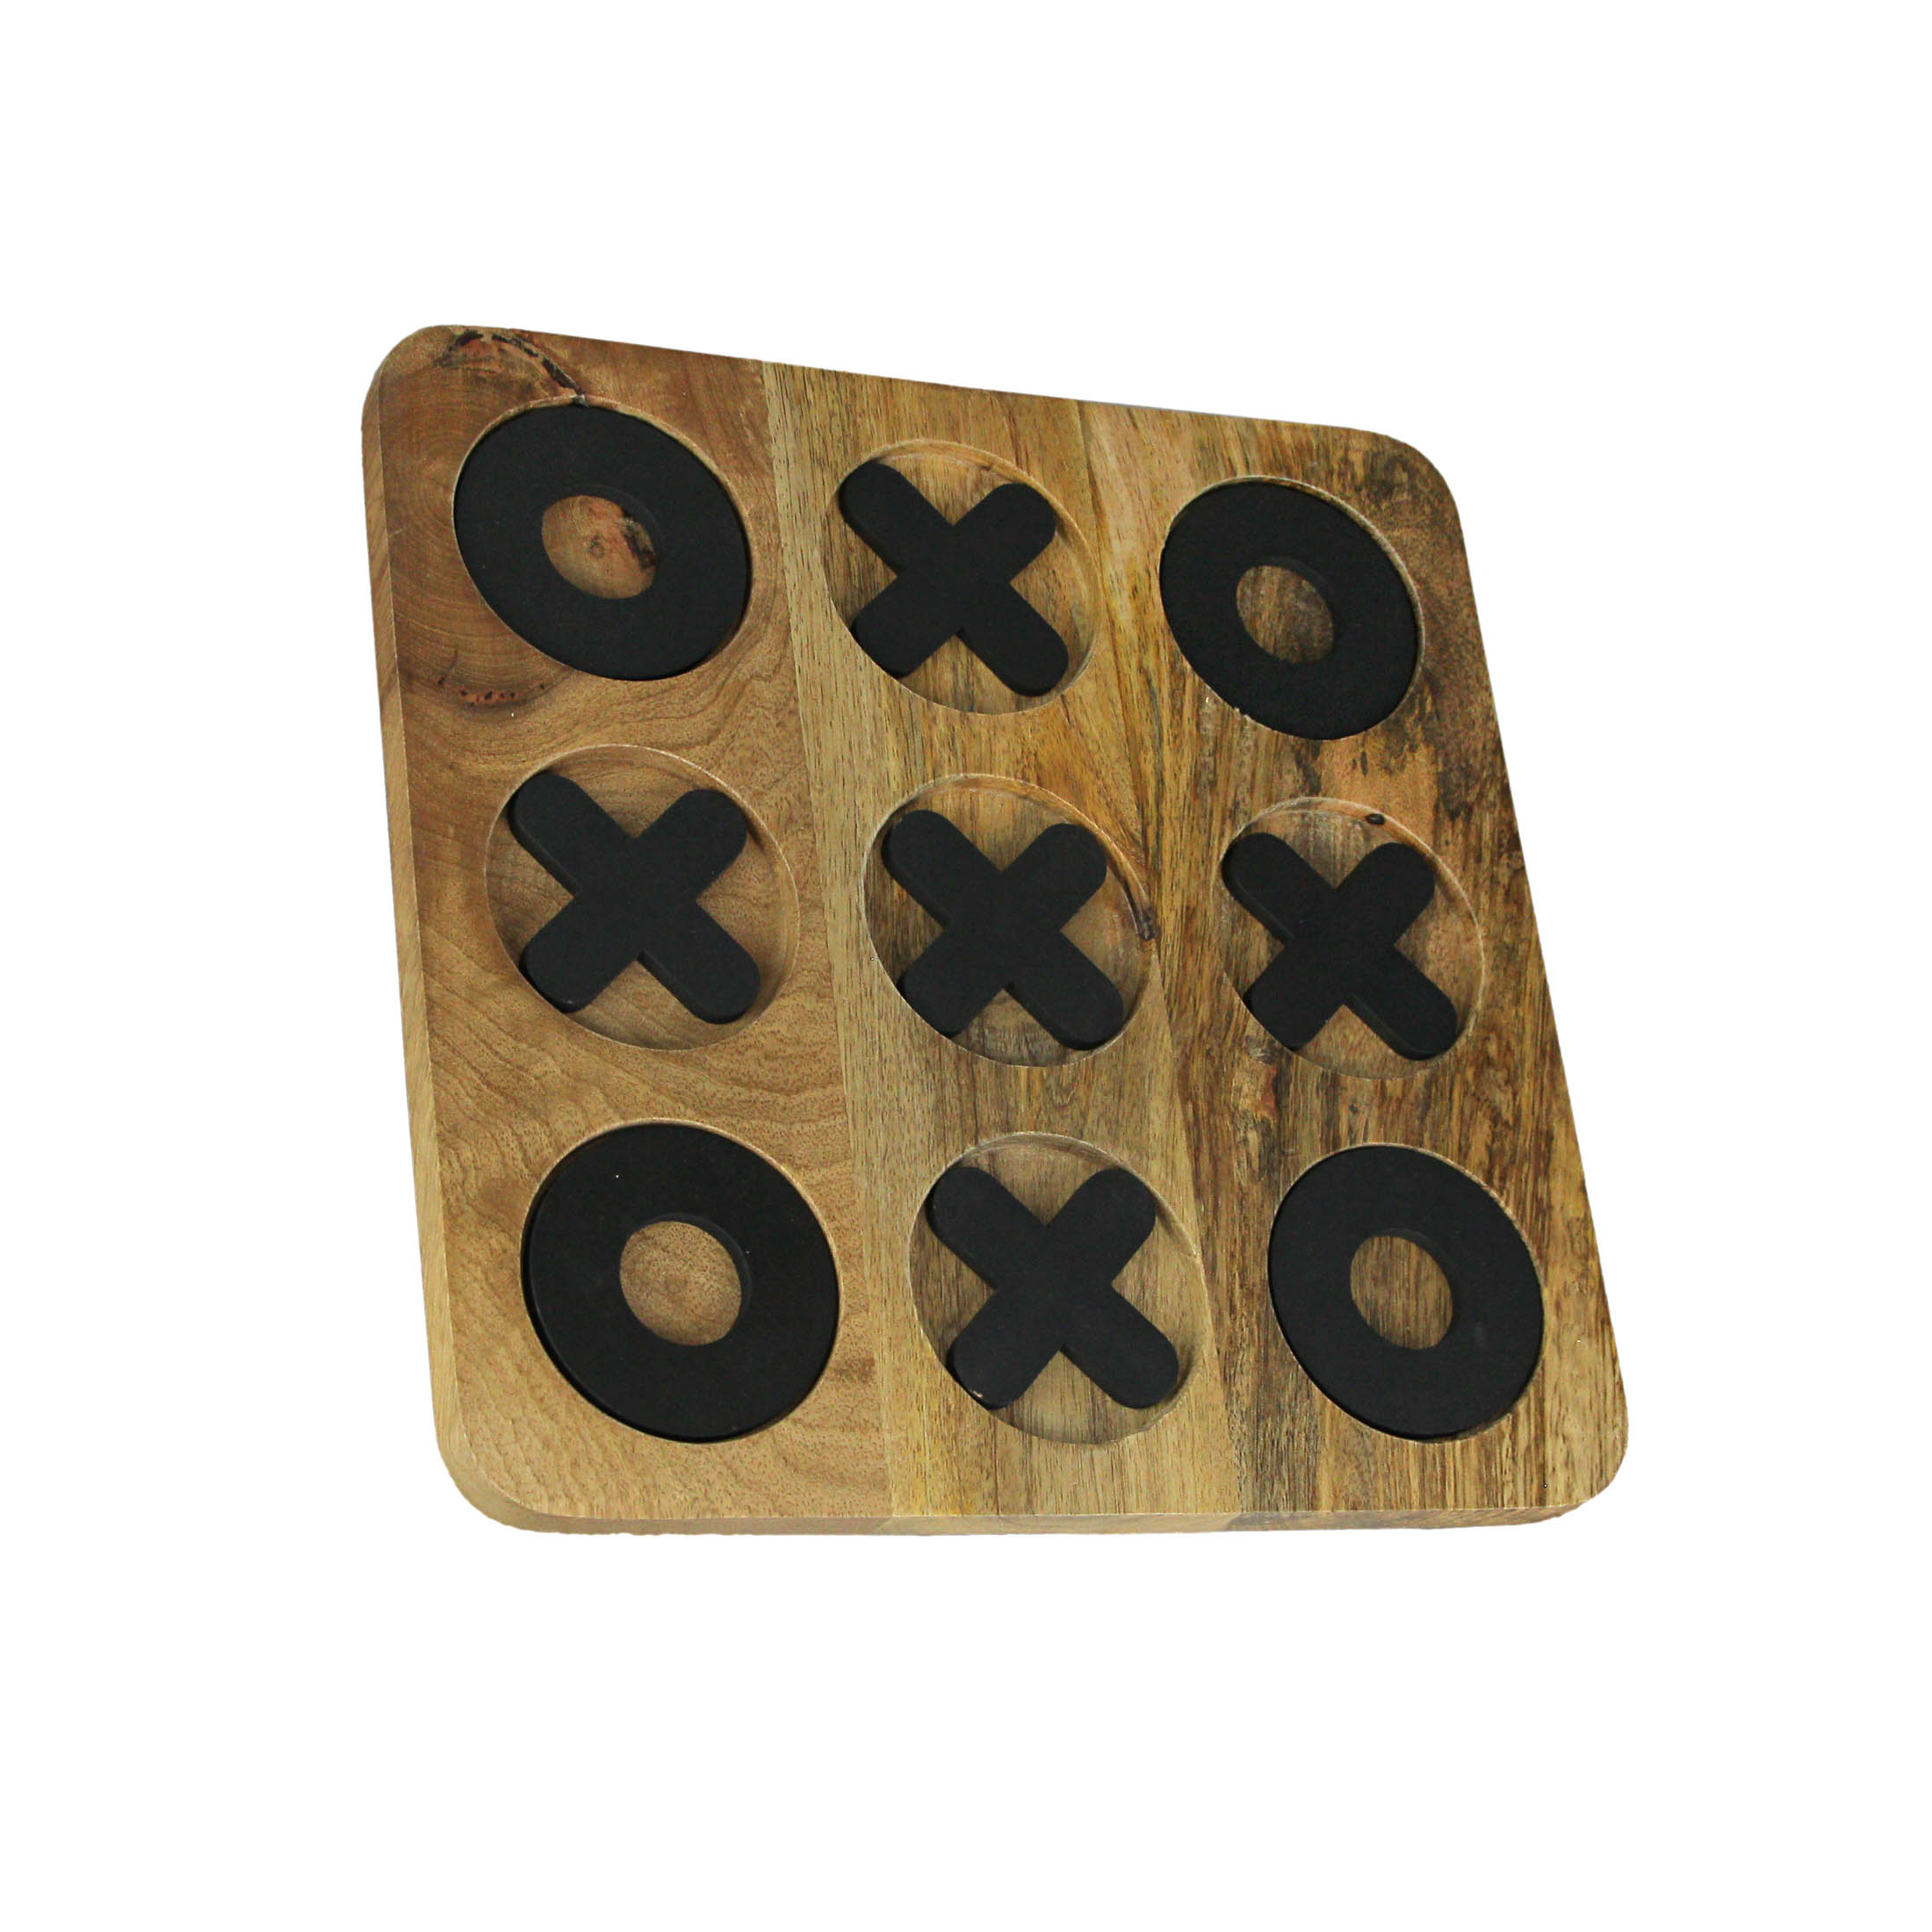 PD Home & Garden Carved Wooden Tabletop Tic Tac Toe Game X and O 11.75 Inch